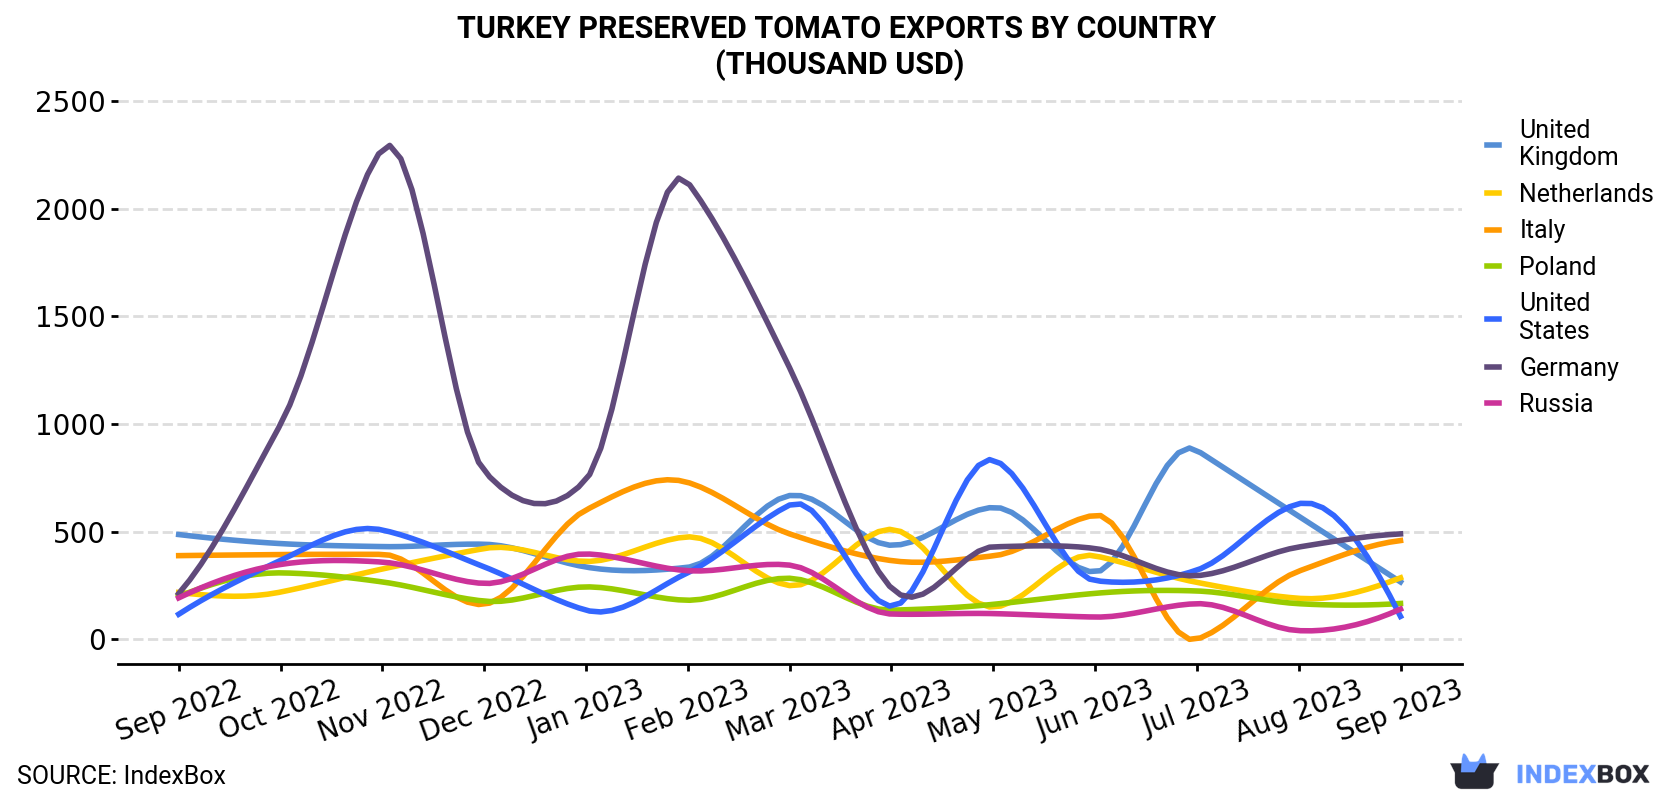 Turkey Preserved Tomato Exports By Country (Thousand USD)